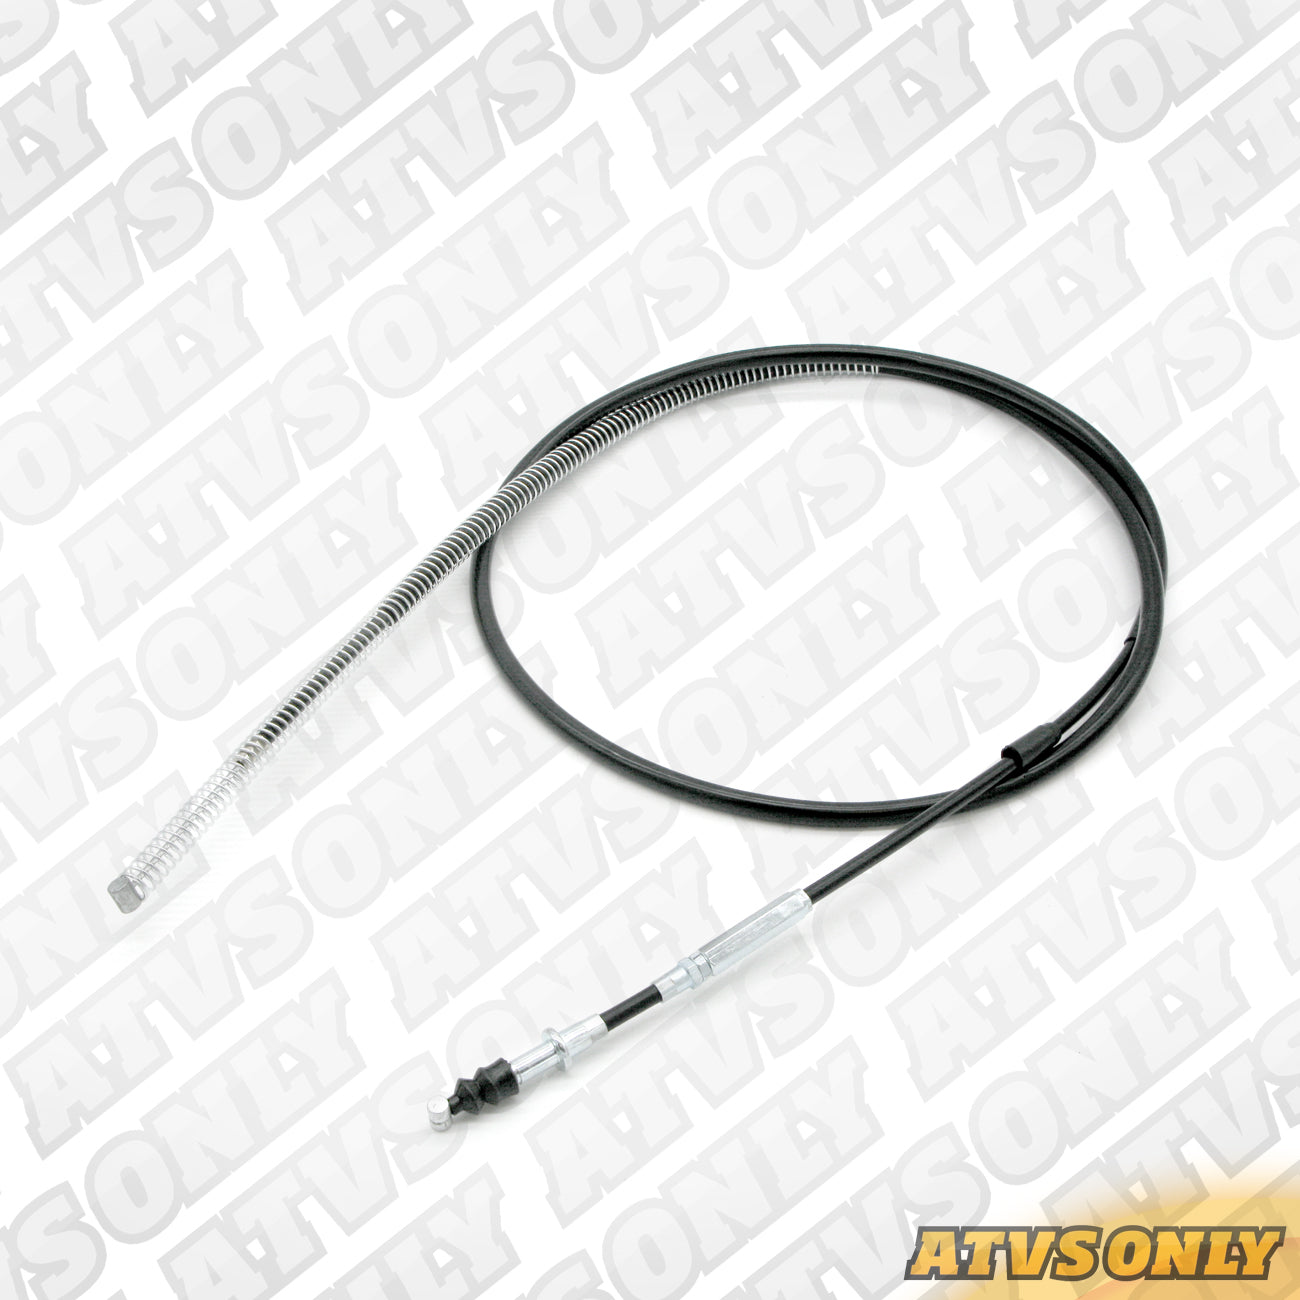 Cables – Replacement Rear Parking Brake Cables